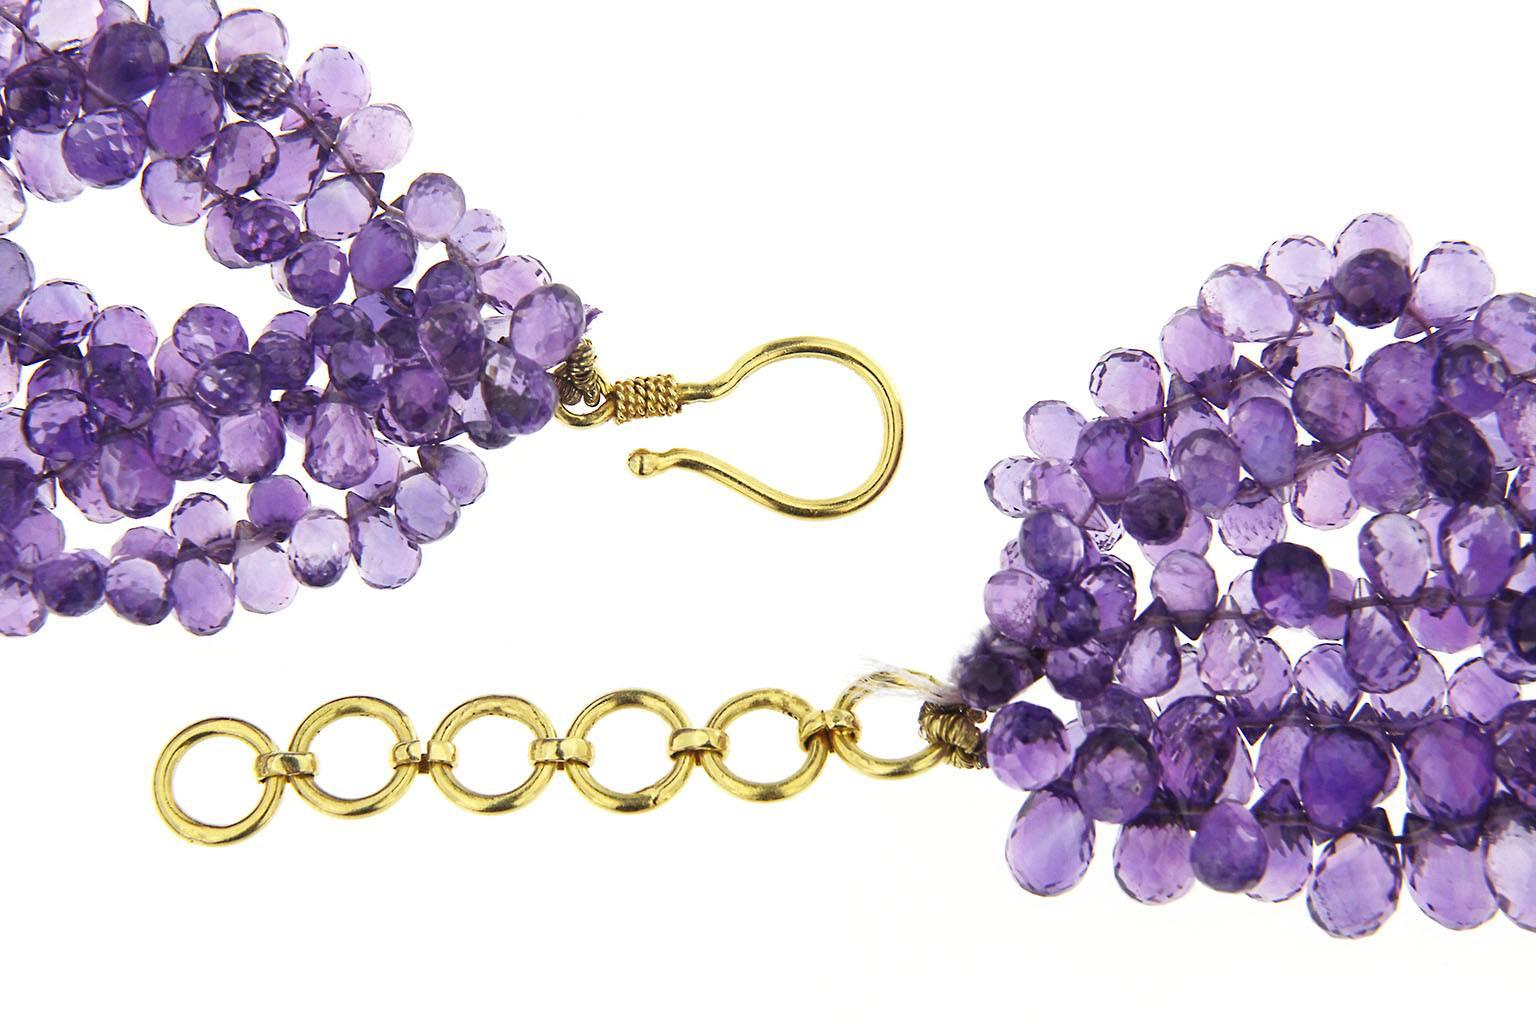 Jona collection, Five Strand Faceted Briolette Amethyst Necklace with a   18kt Yellow Gold Clasp.
Dimensions: 1.96 in. W x 18.89 in. L. - 5 cm. W x 48 cm. L
All Jona jewelry is new and has never been previously owned or worn. Each item will arrive